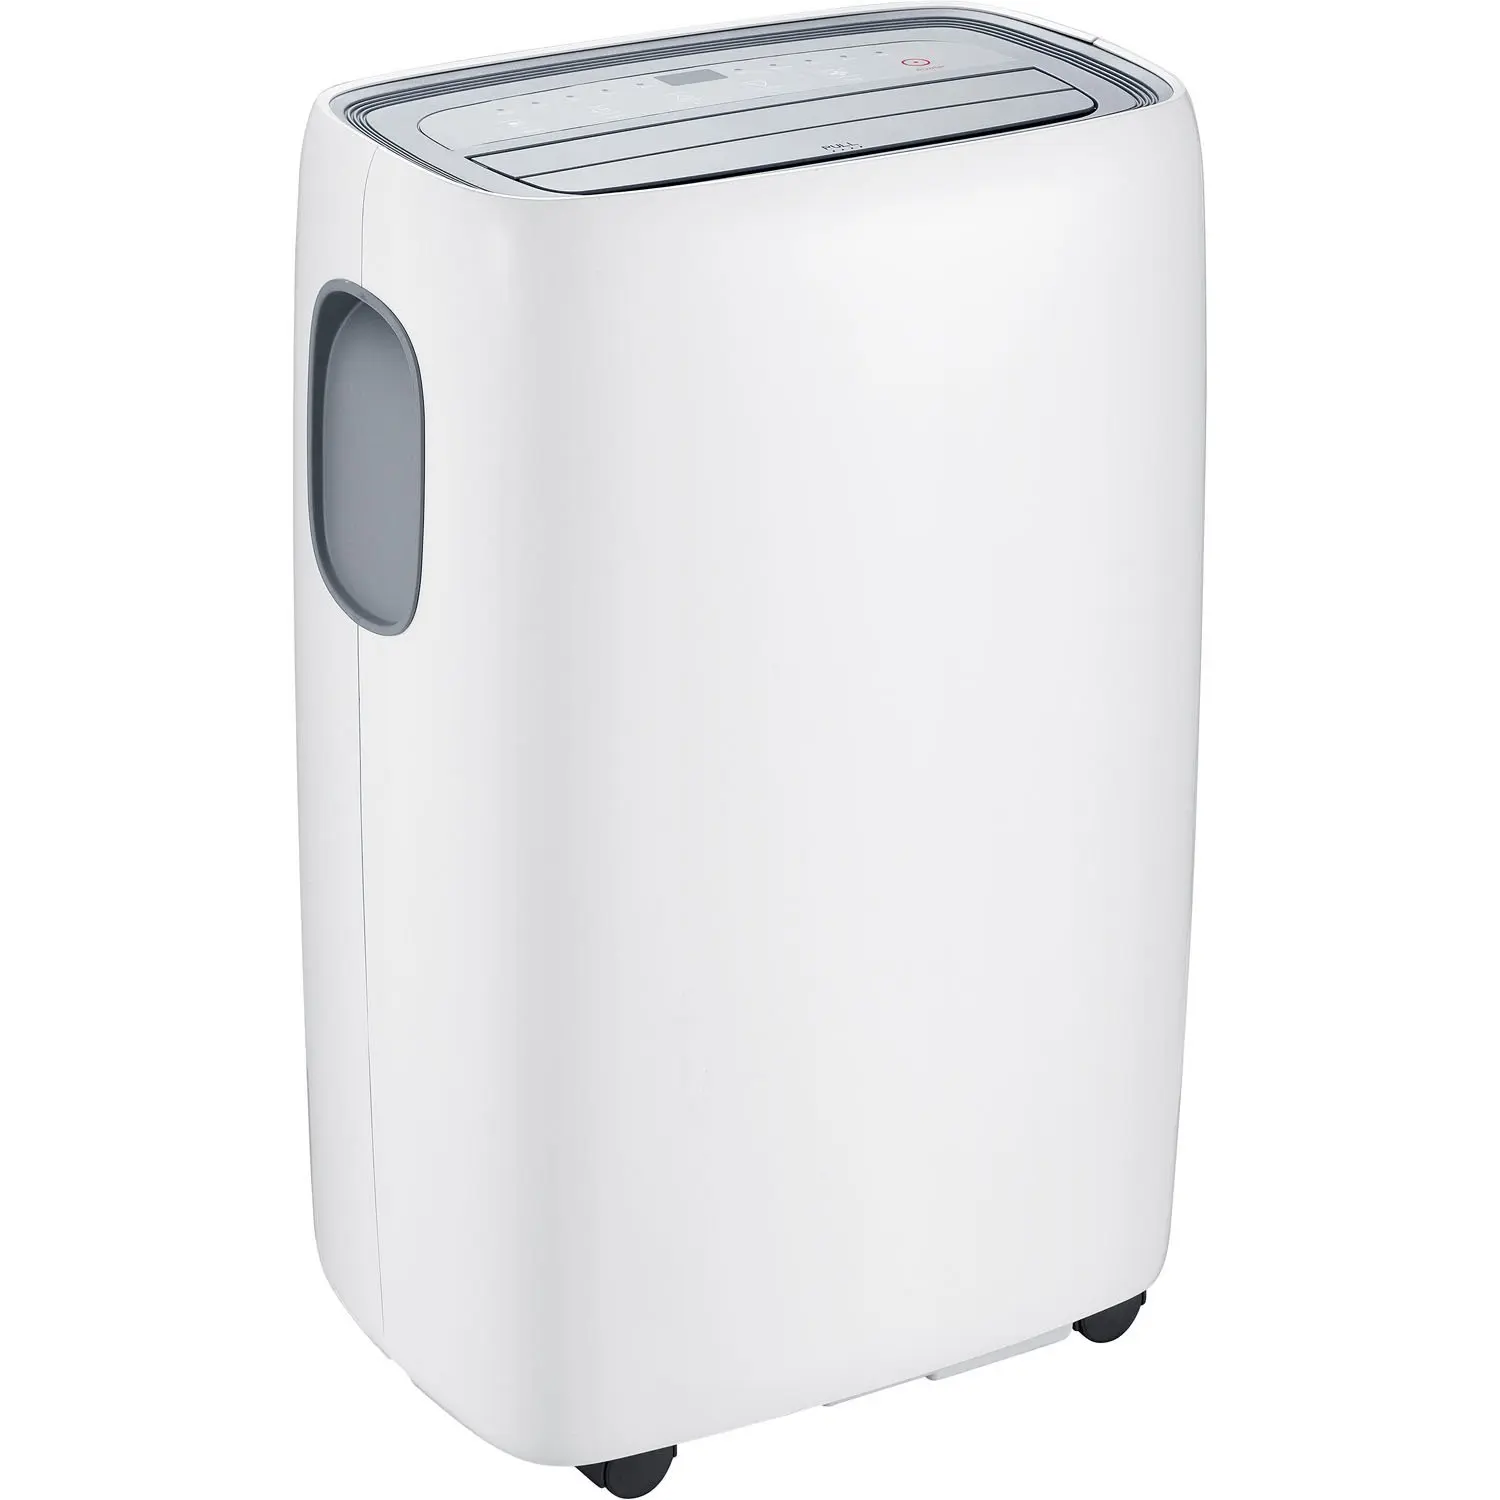 Cheap Tcl Air Conditioner, find Tcl Air Conditioner deals on line at